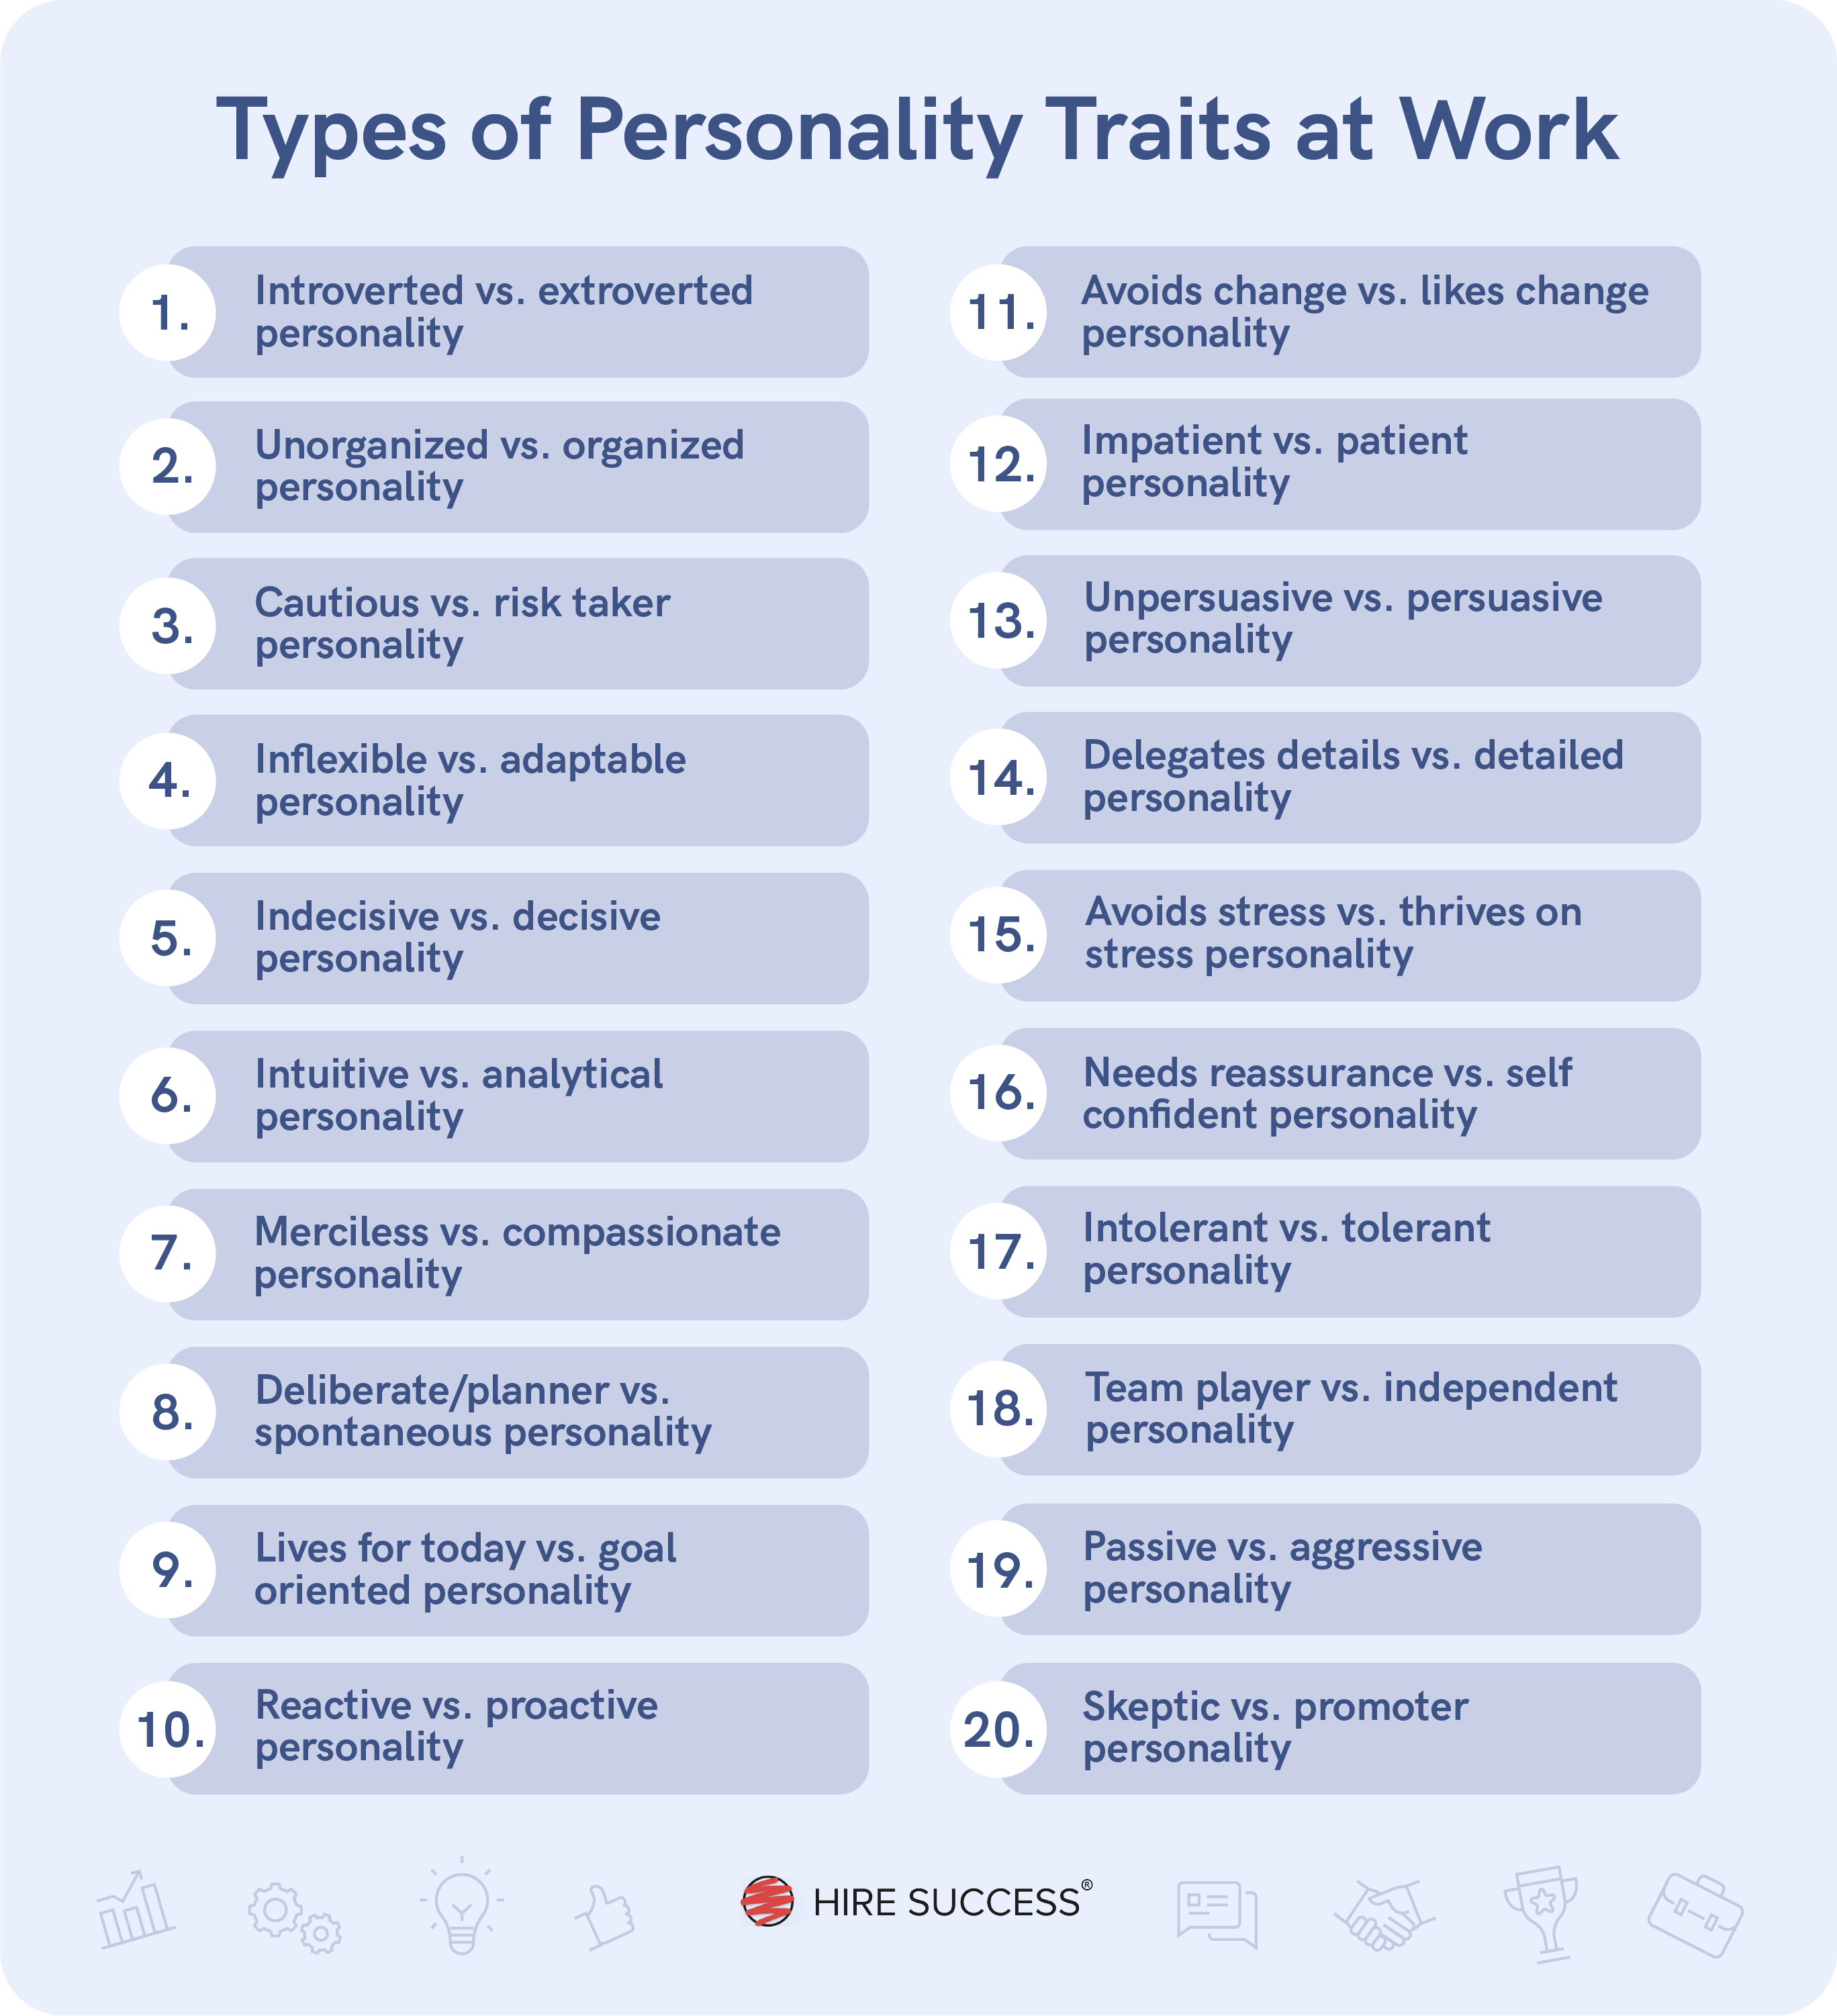 Types of personality traits at work.